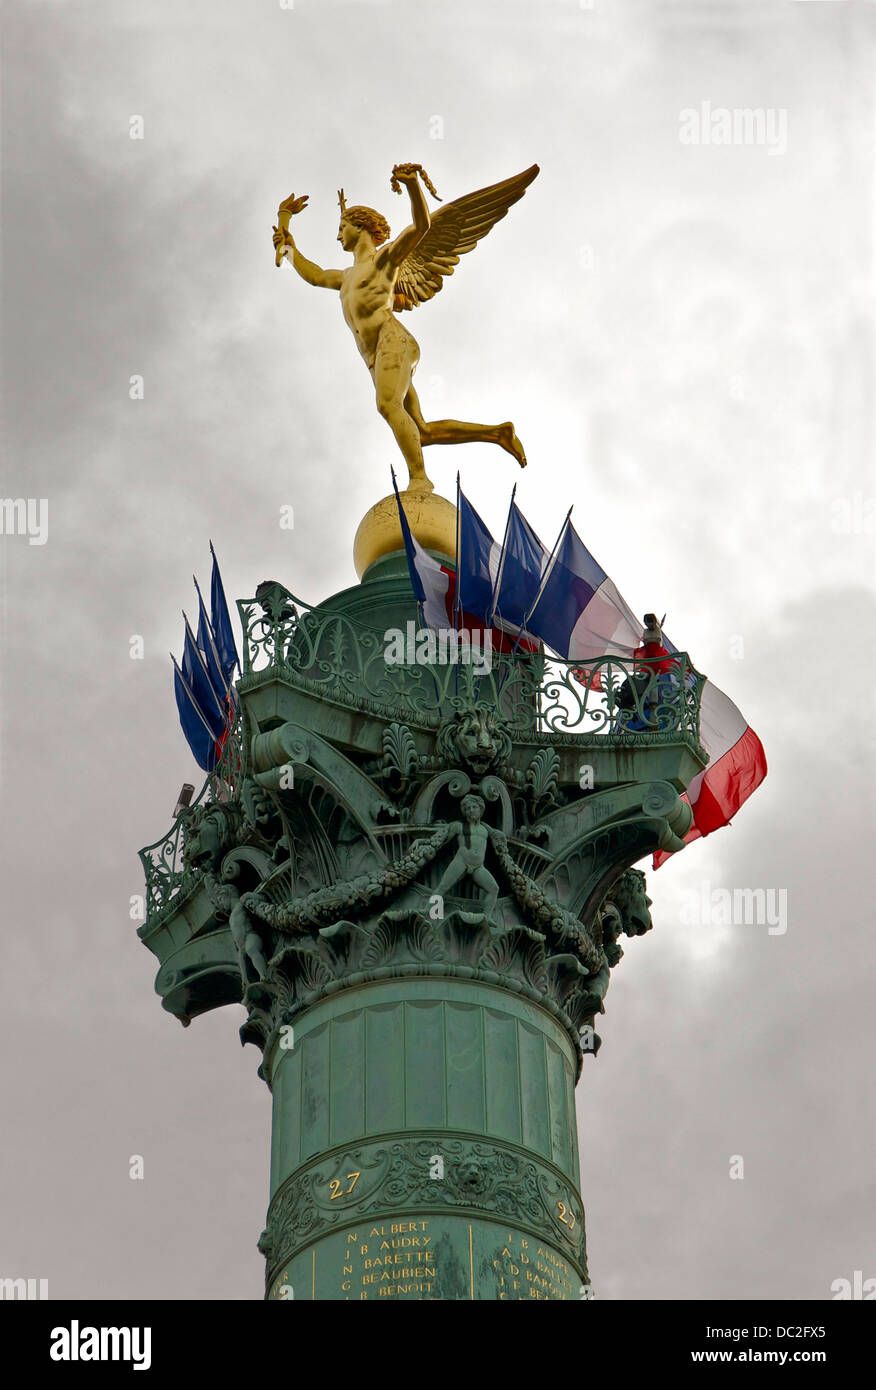 The Genius of Liberty, topping the july column with flags, 14th july 2012, Bastille square, Paris, France. Stock Photo